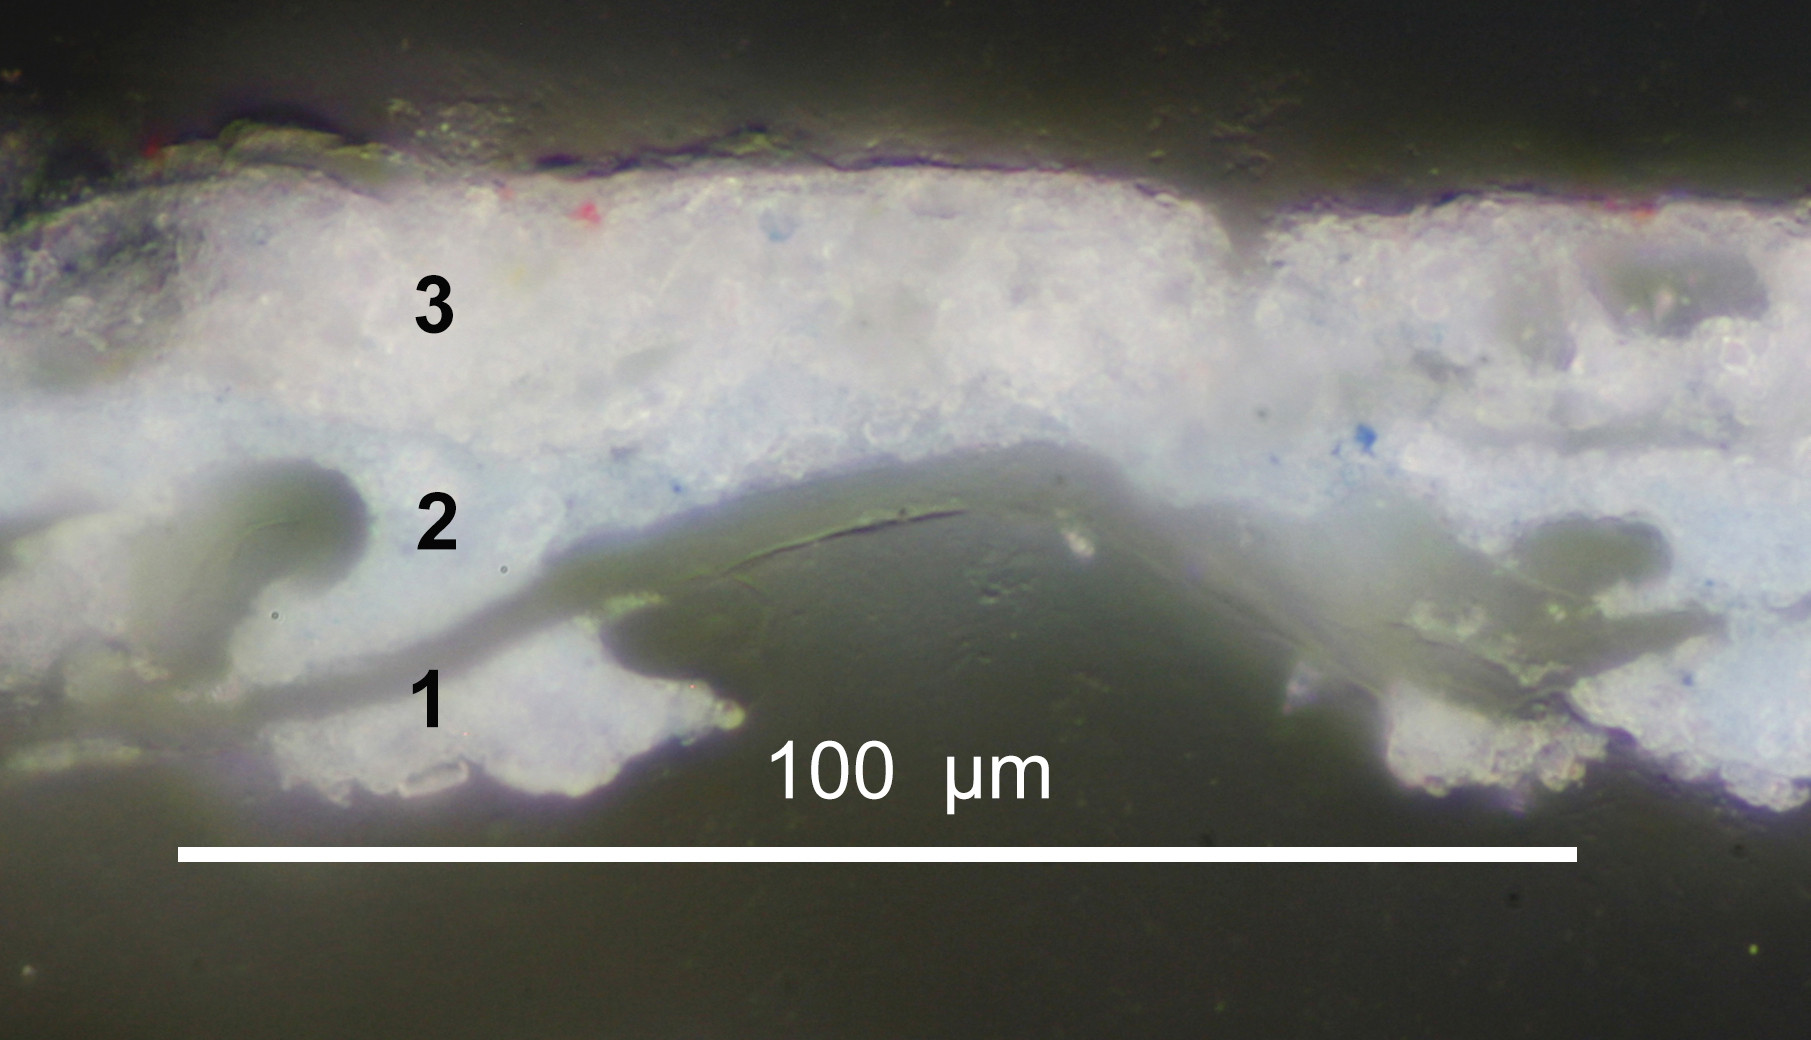 A magnified paint sample viewed in cross-section showing blue then pale pink paint layers above the fibres of a paper support